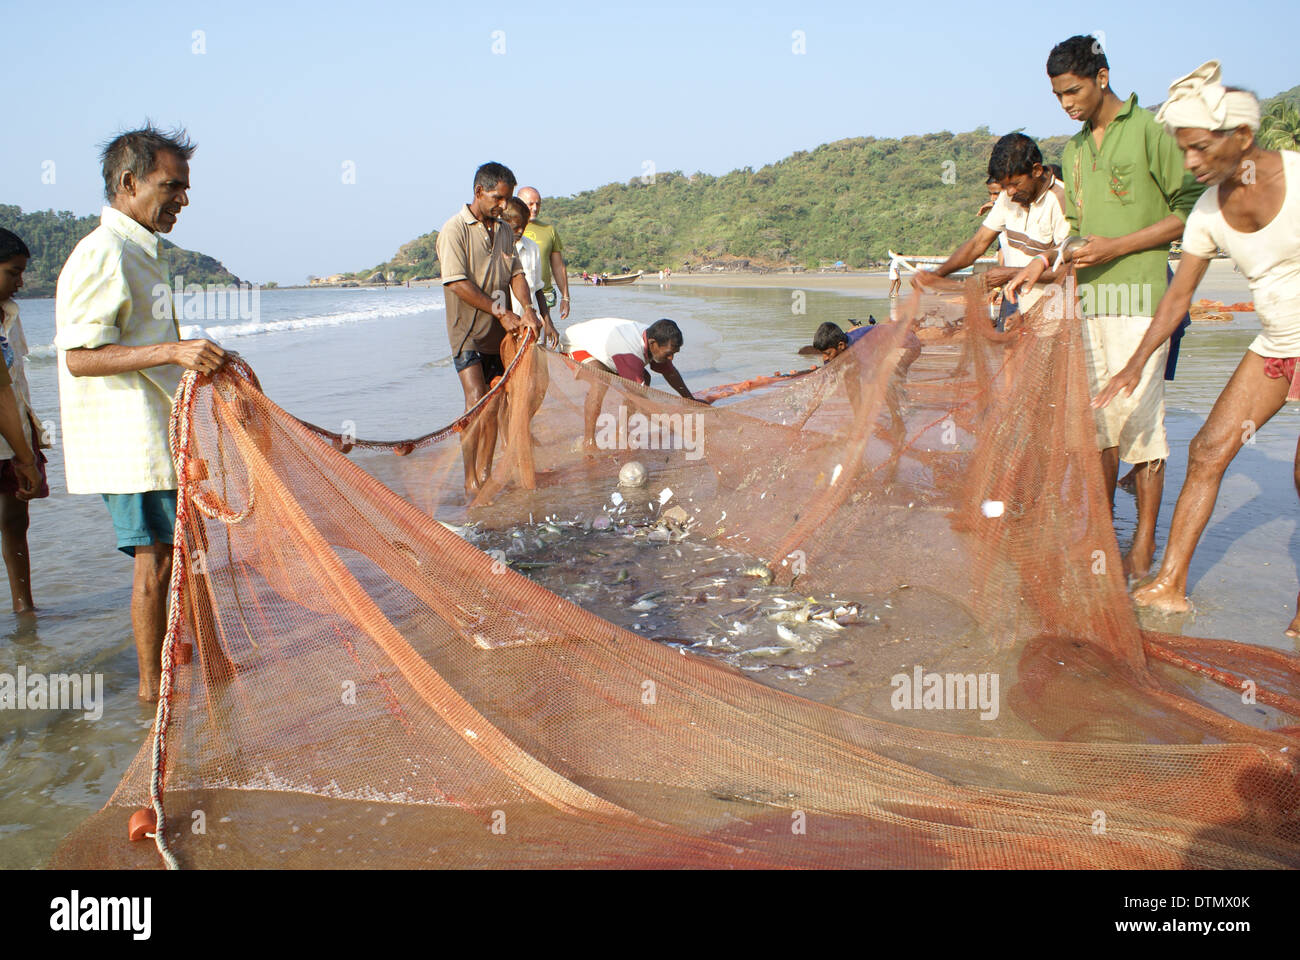 Indian fishermen gather fish on a fishing net after haul Stock